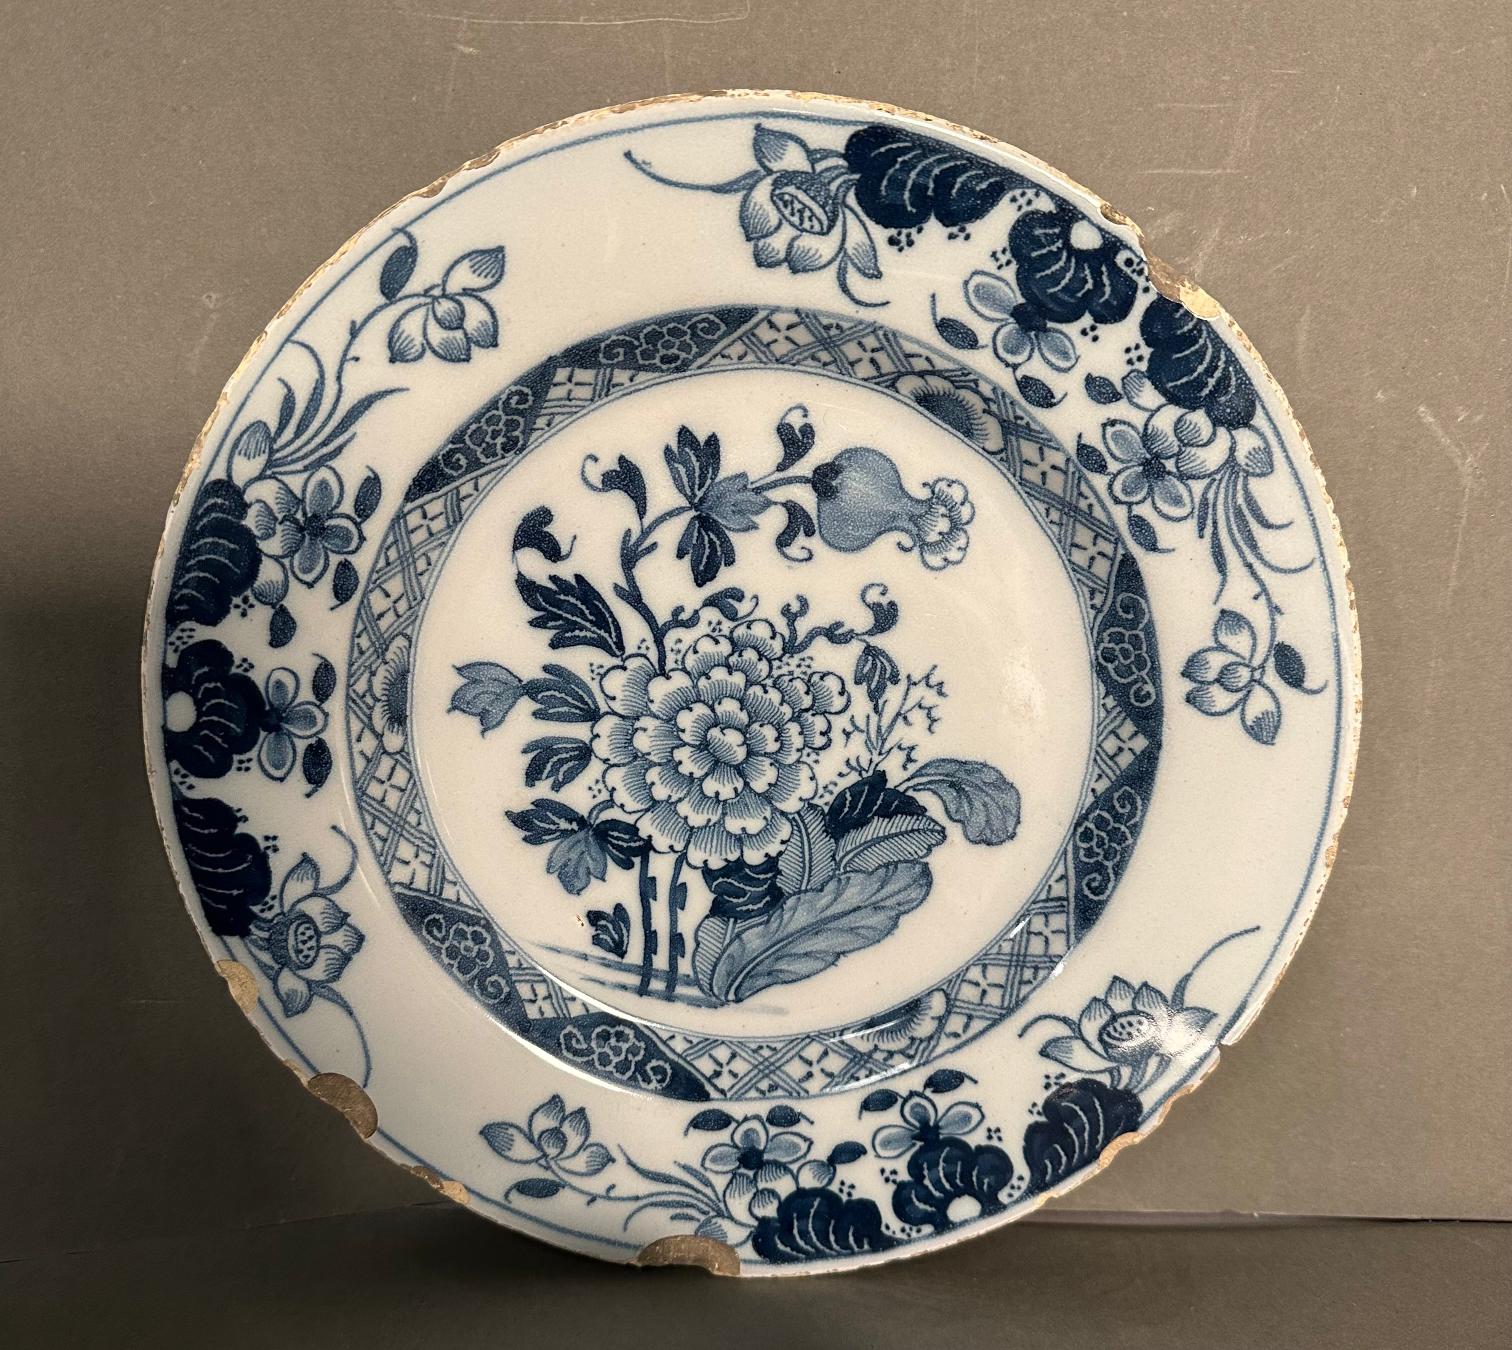 A selection of Chinese blue and white ceramic to include a plate, side plates and a small bowl - Image 3 of 12